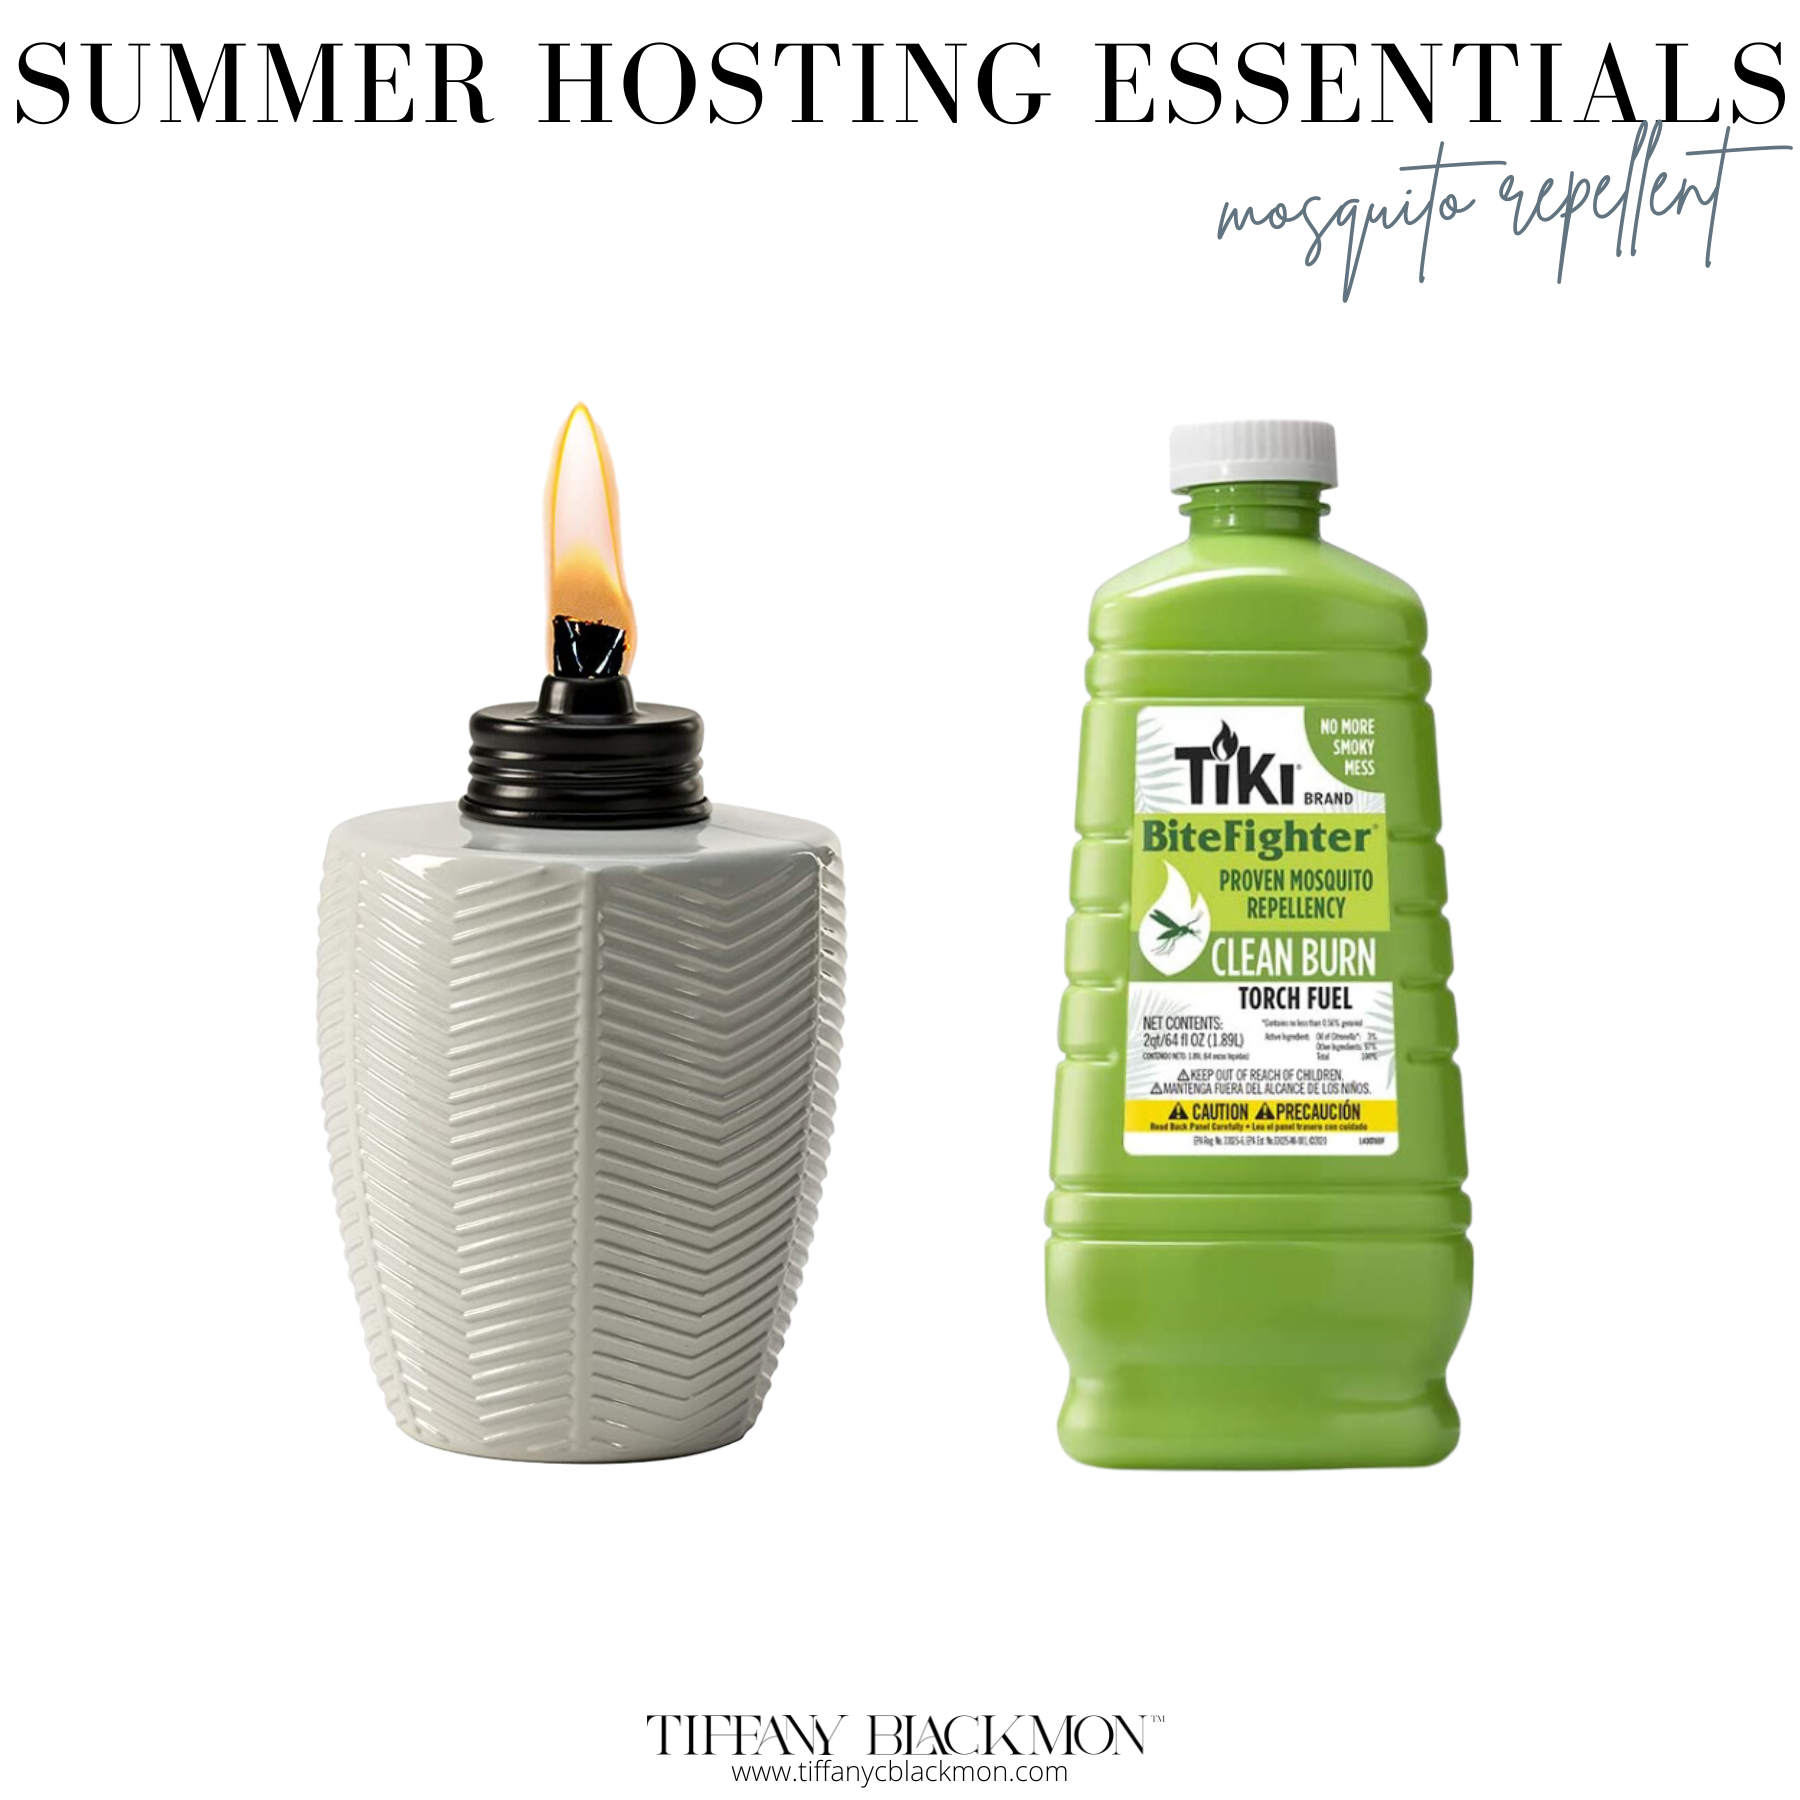 Hosting 101: Memorial Day Cookout
#hostingessentials #outoorhosting #party #lifestyle #barbecue #bbq #cookout #memorialday 